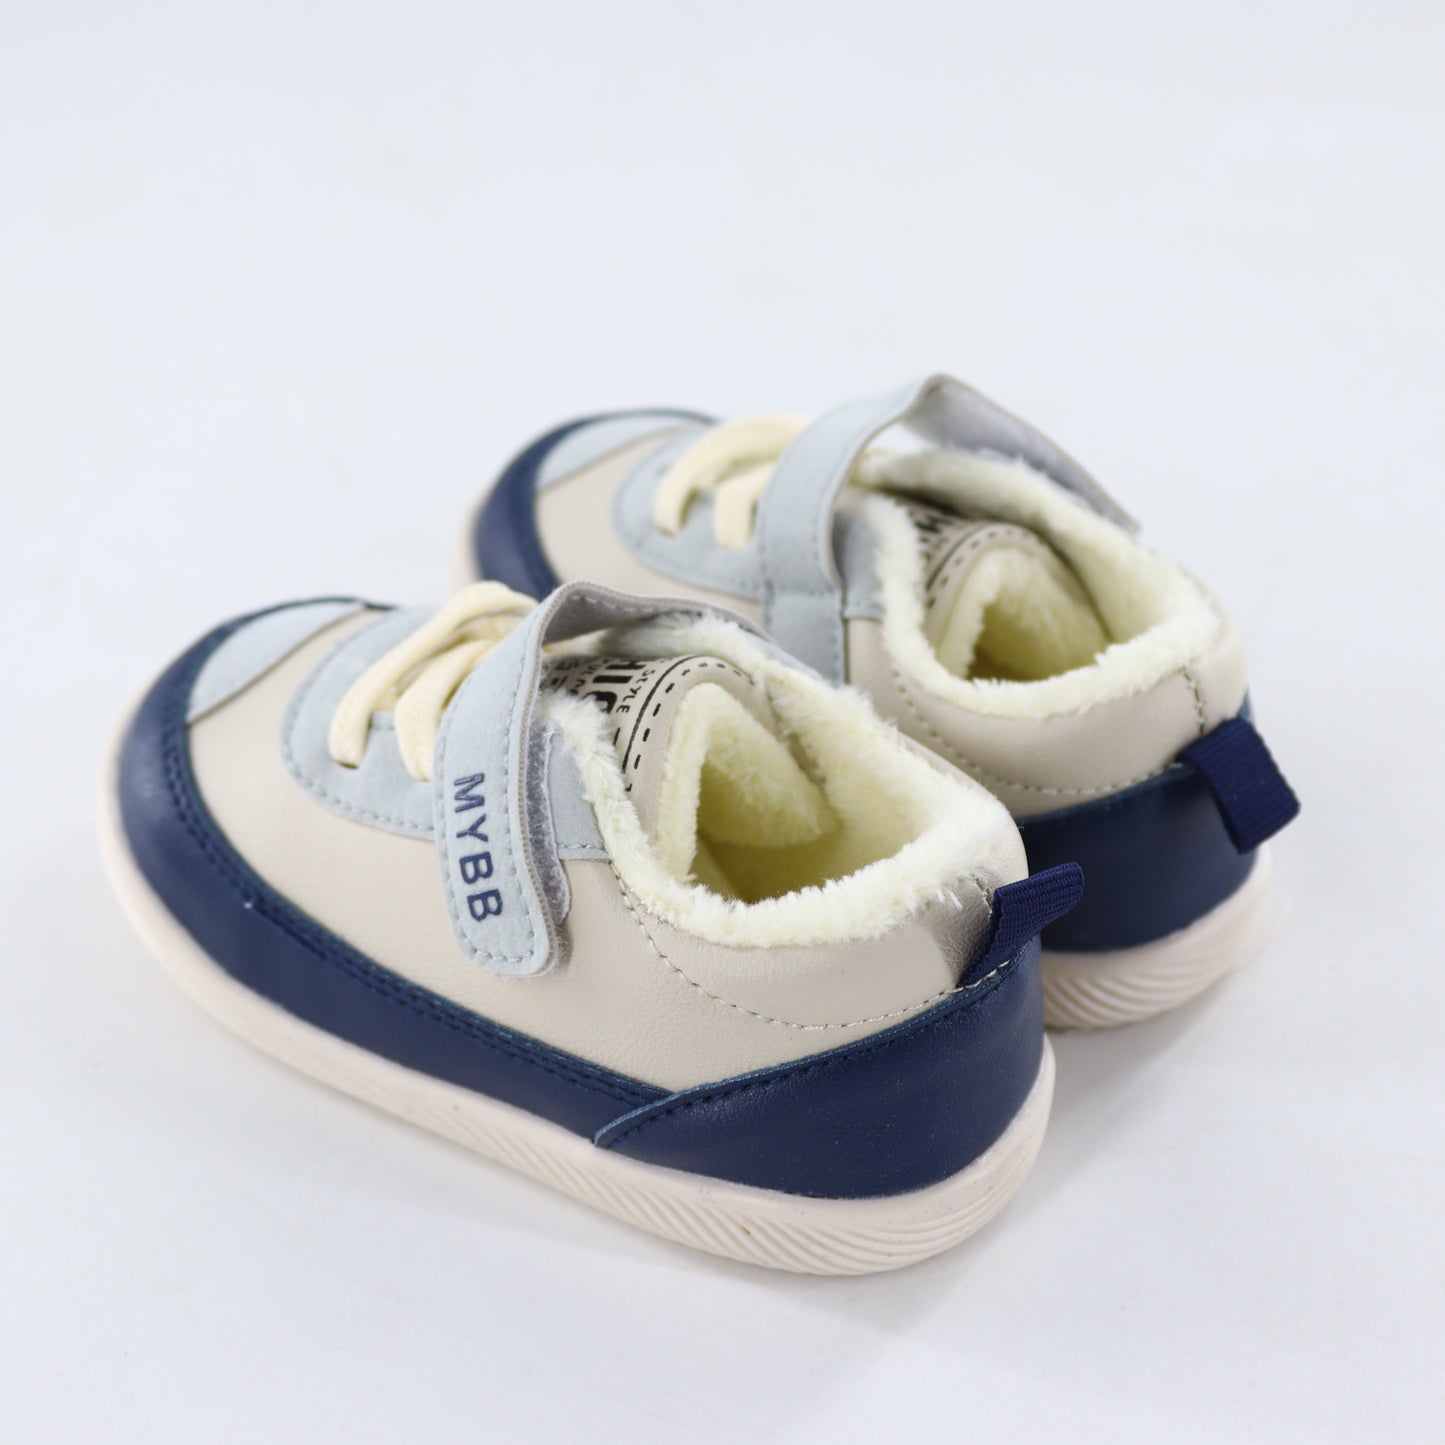 My BaBy Fashionable Sneakers